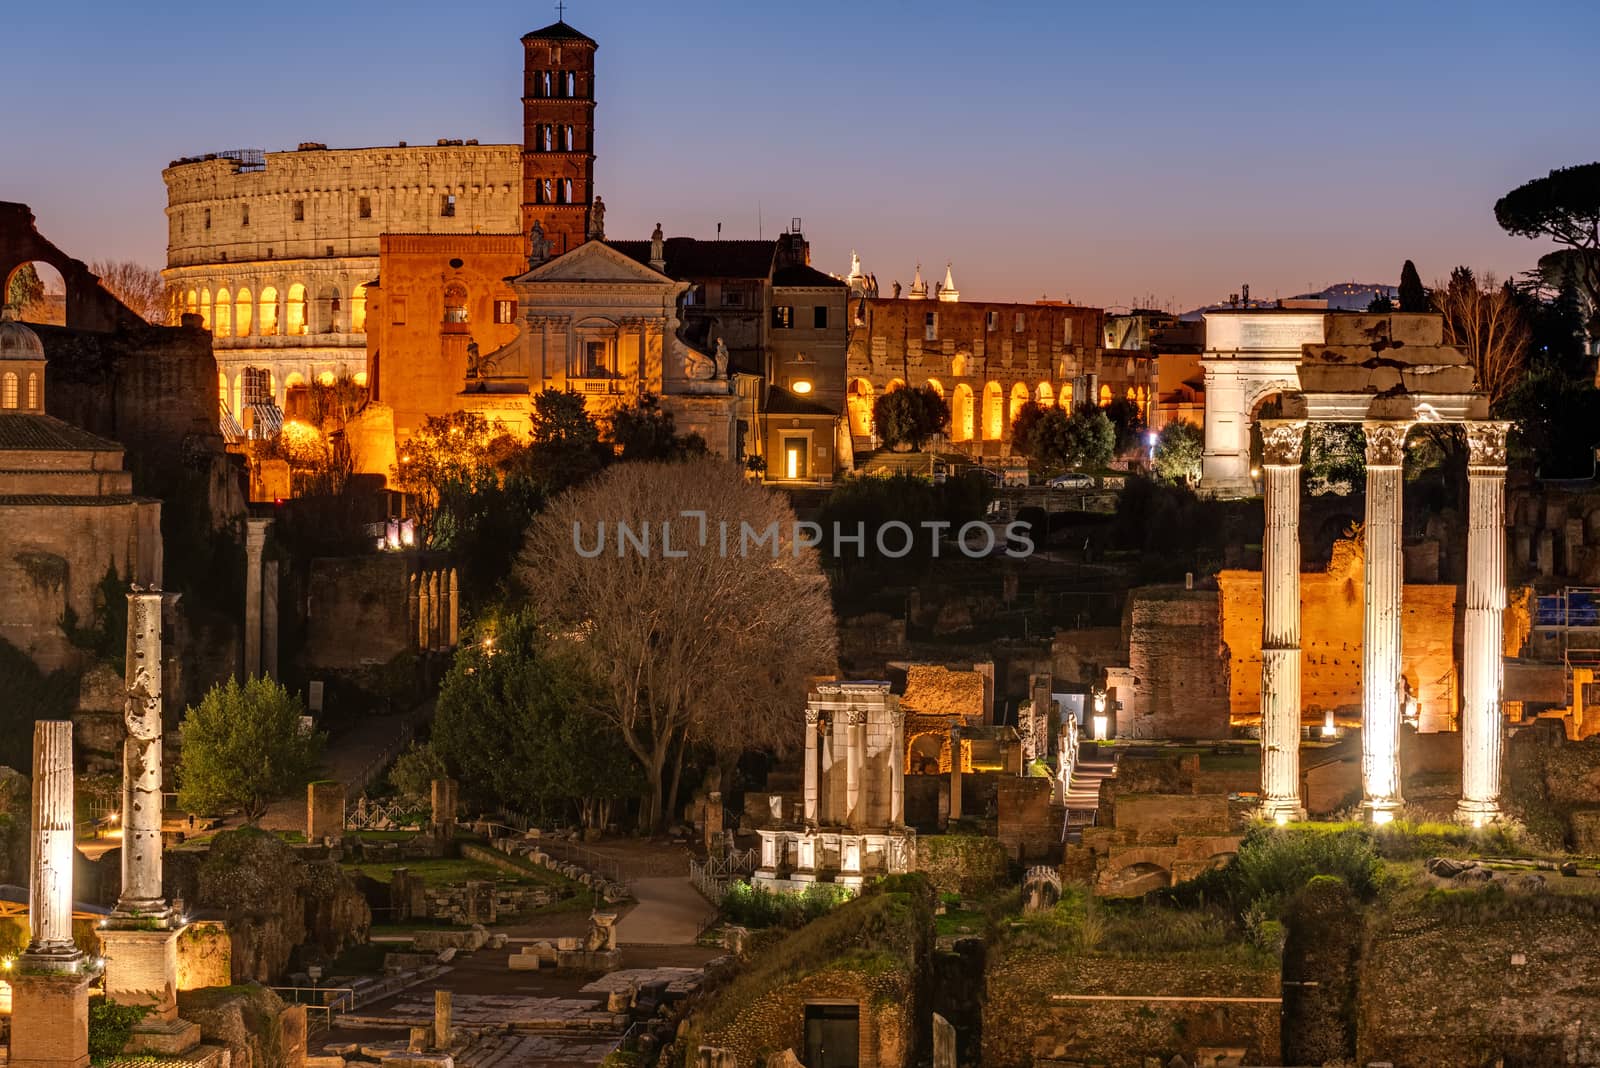 View over the ruins of the Roman Forum to the famous Colosseum in Rome at dawn